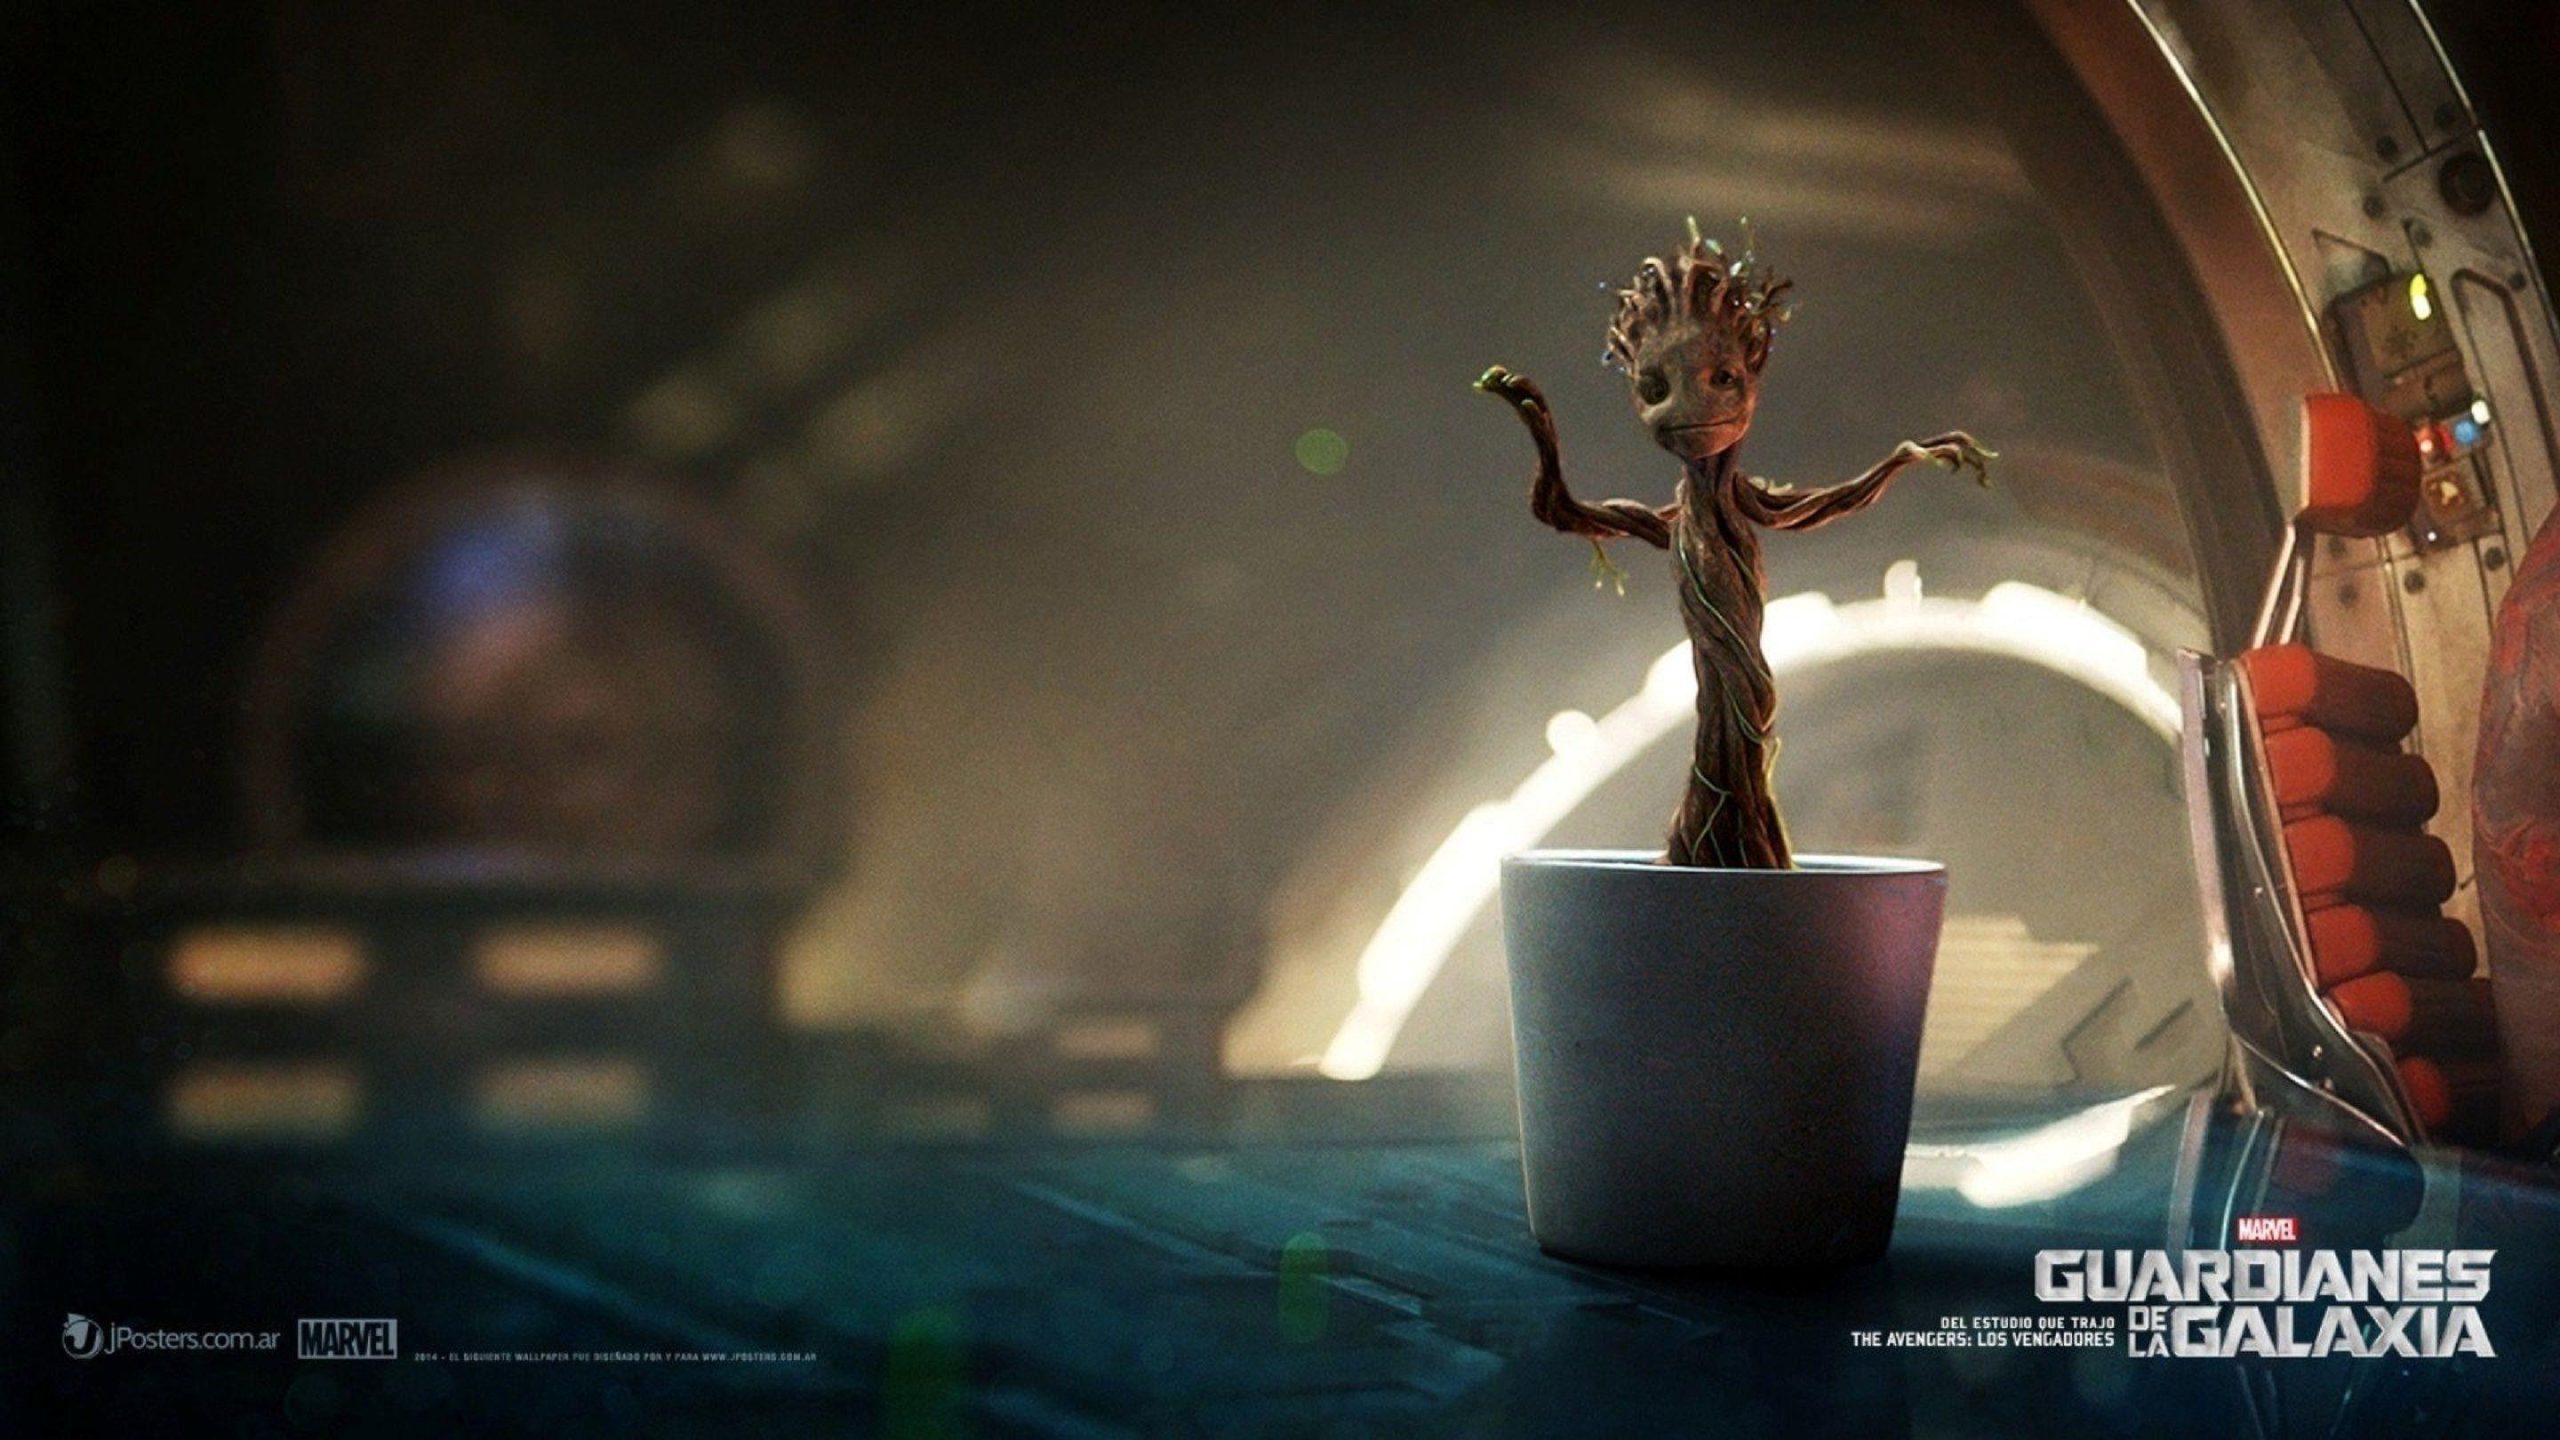 Cute Baby Groot Guardians Of The Galaxy Hd Best Wallpapers